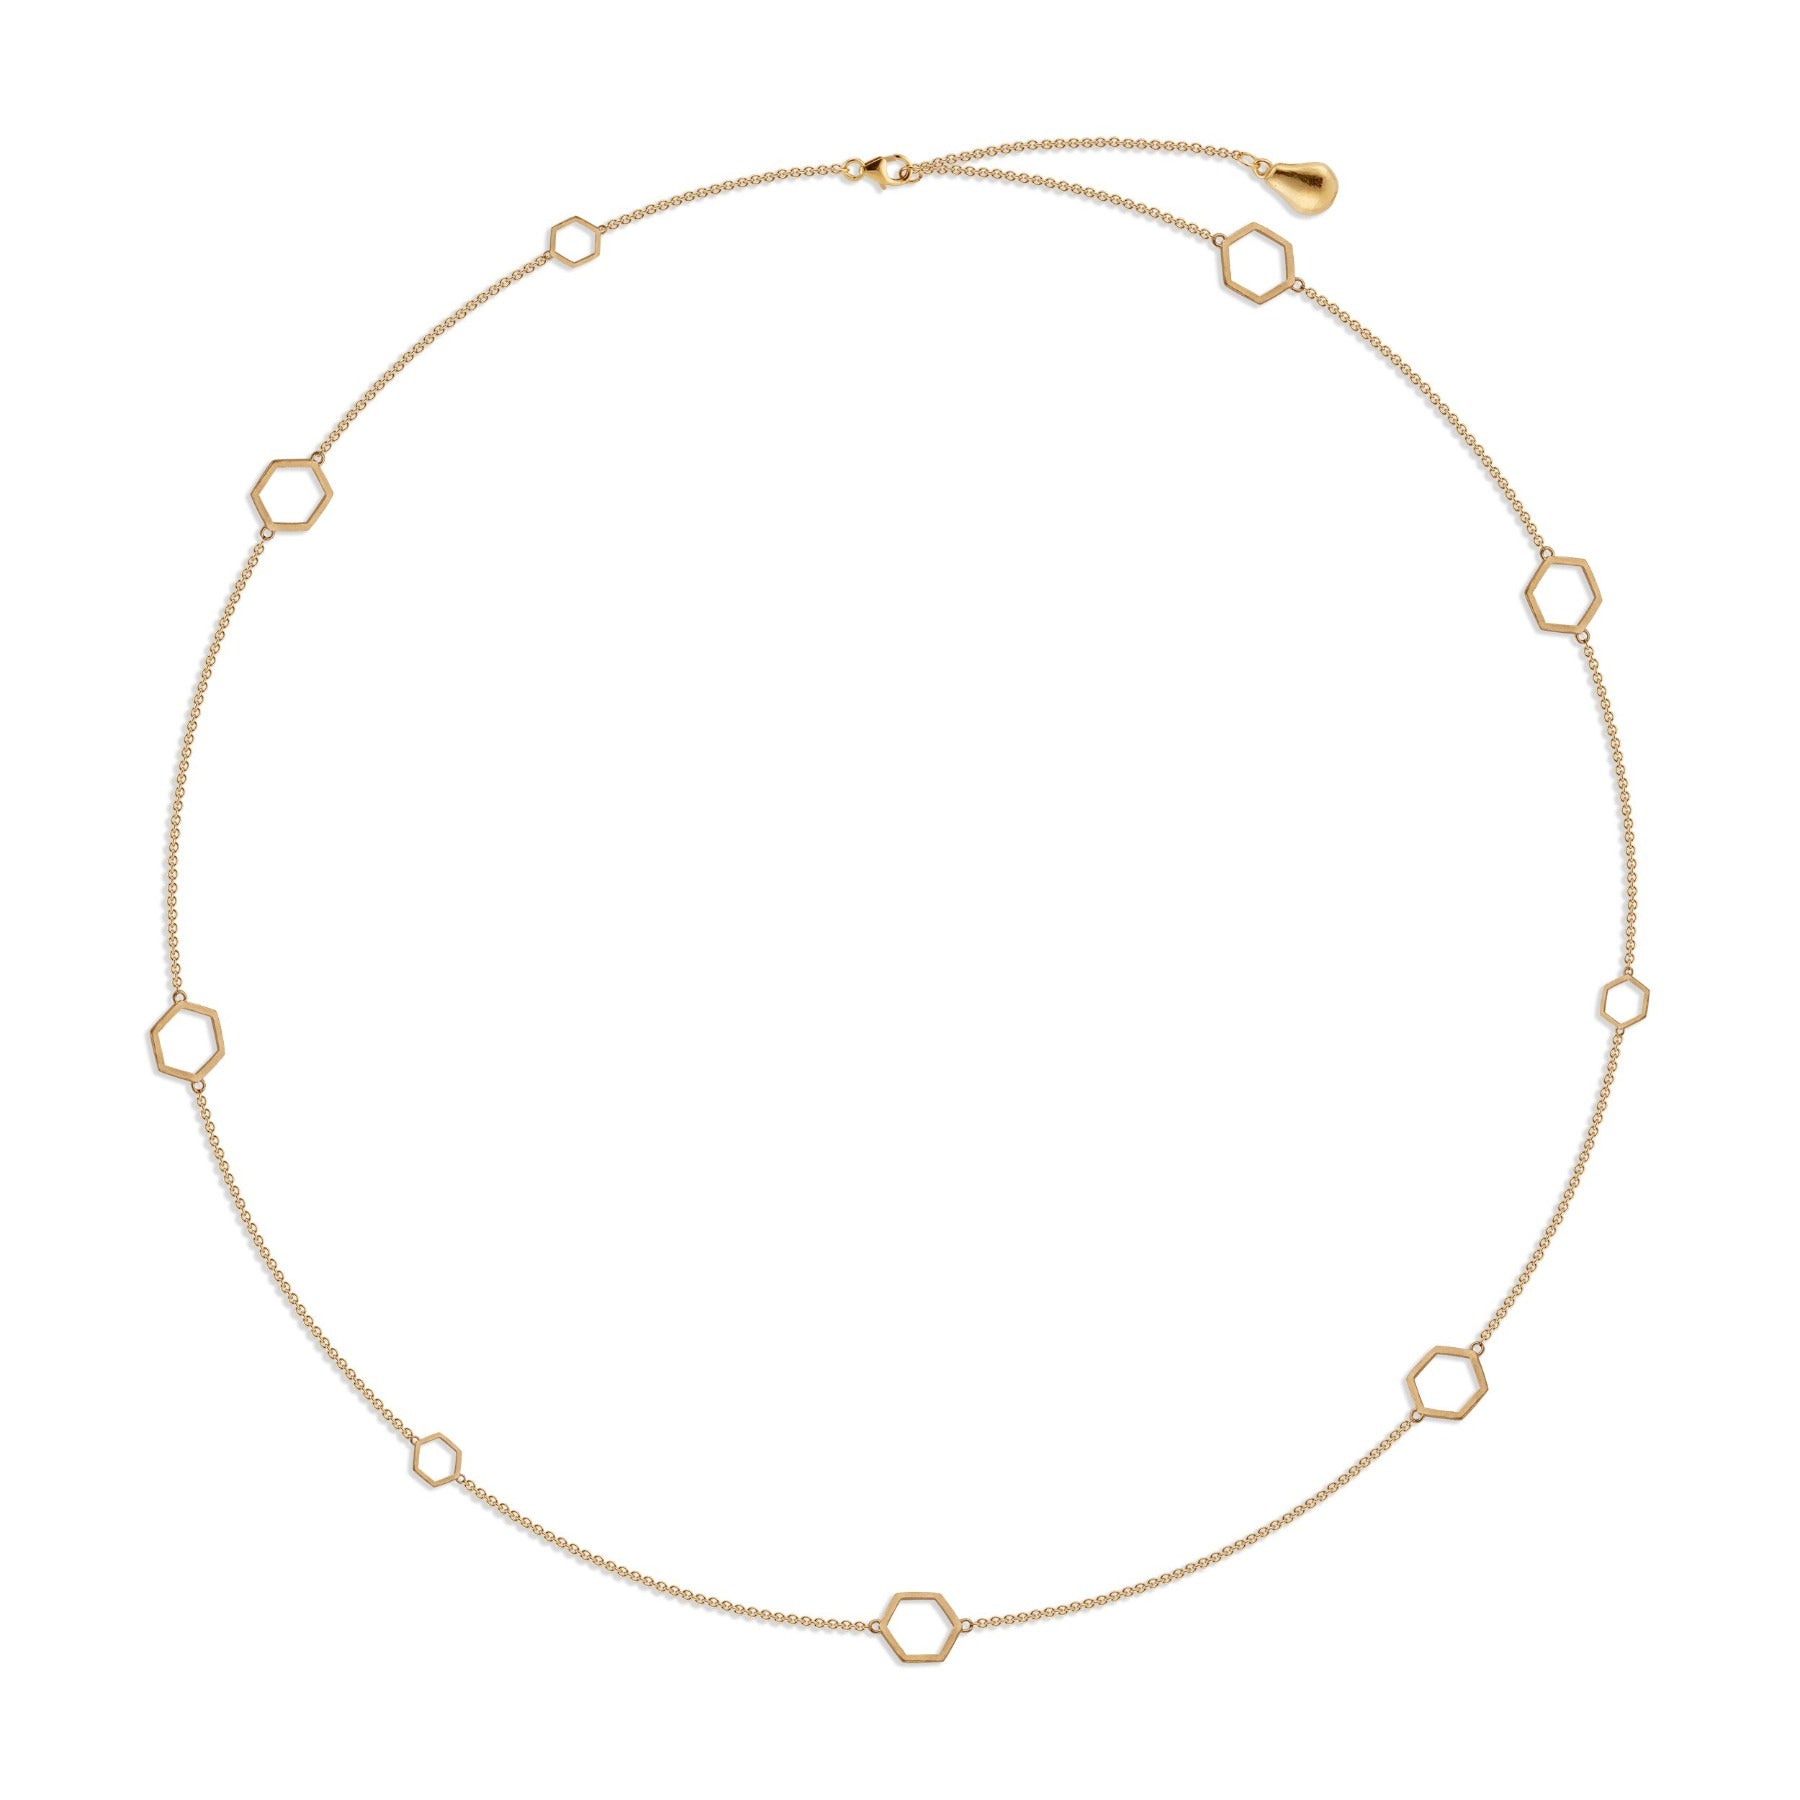 Long necklace with nine geometric hexagons stationed on a chain with a pear charm in 18k gold vermeil.